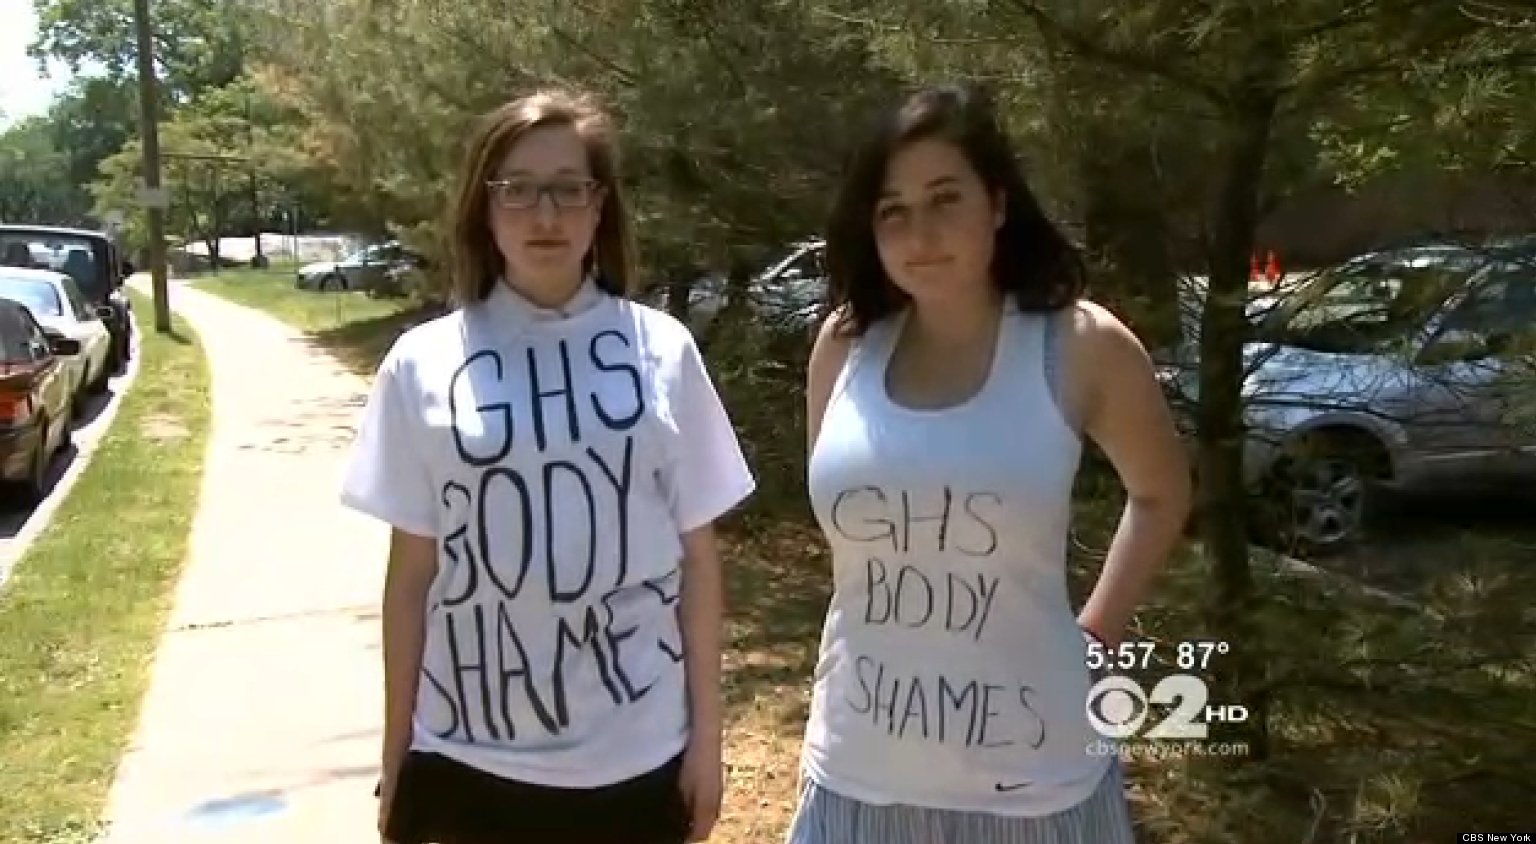 Why These Students Are Protesting Their School Dress Code (VIDEO)